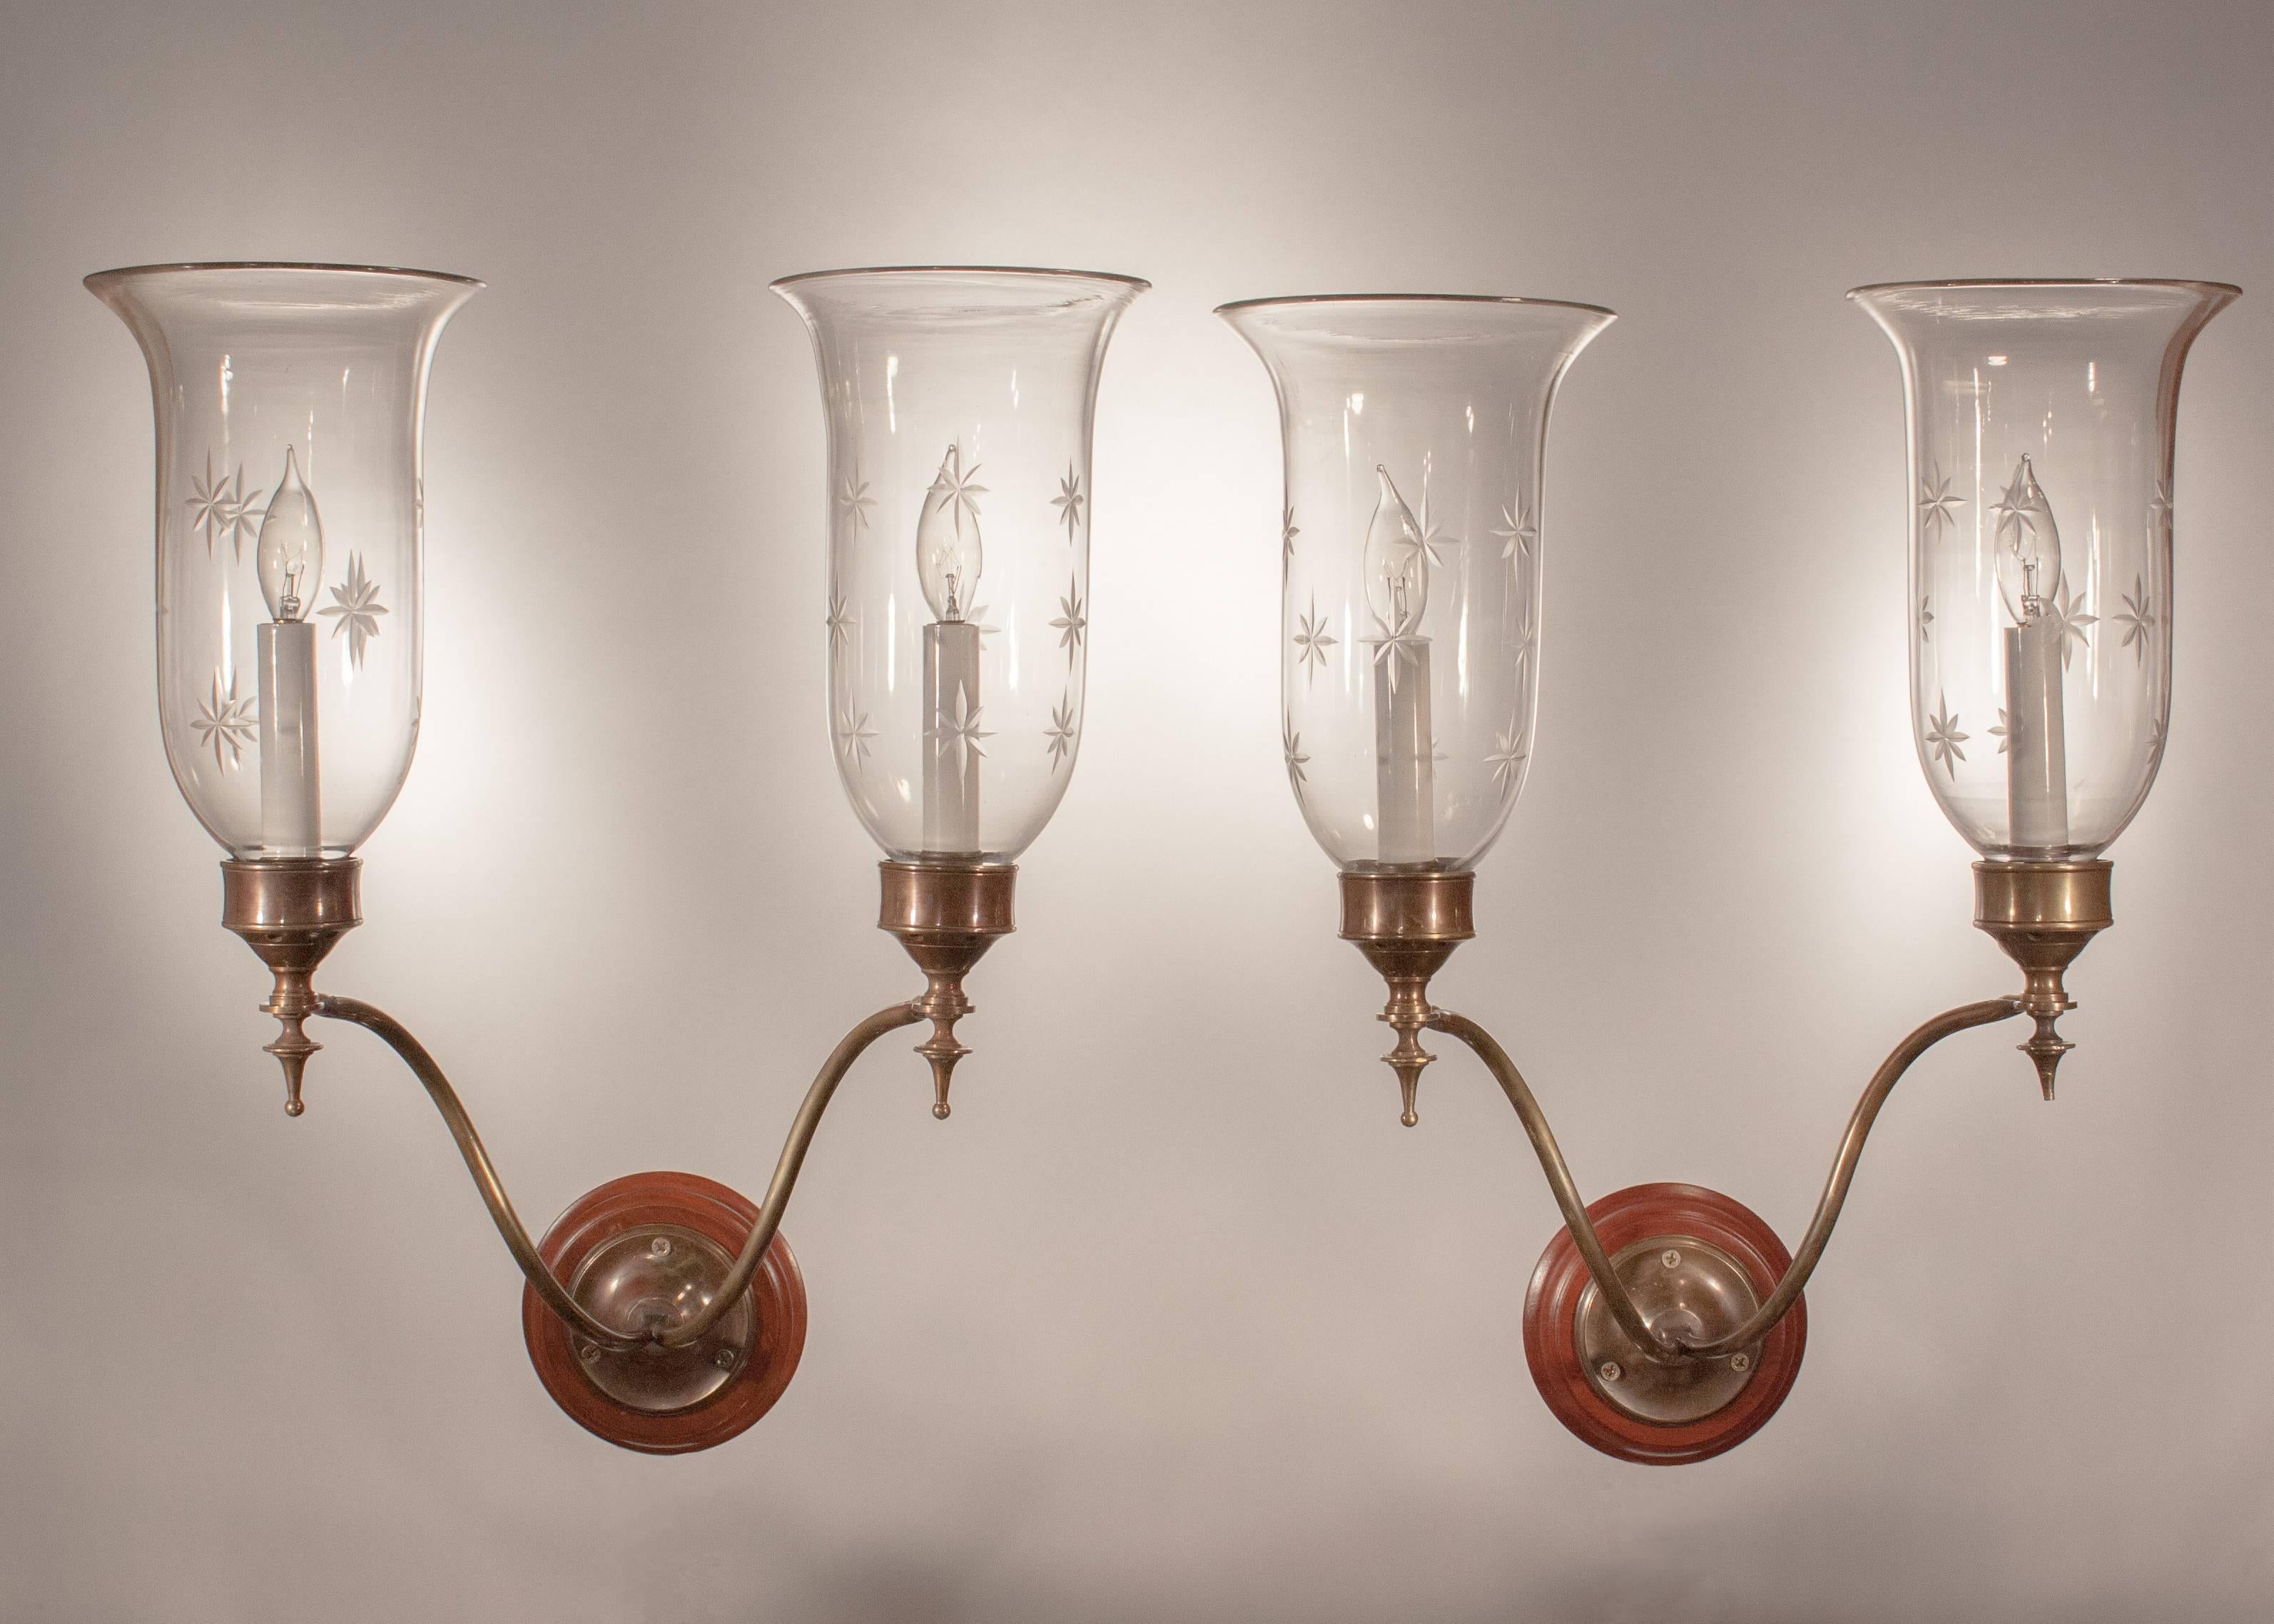 Set of four well-matched, gracefully flared English hurricane sconce shades, circa 1890, featuring superb quality handblown glass and etched stars. The sconces have been newly electrified, with each shade casting a lovely light from a single